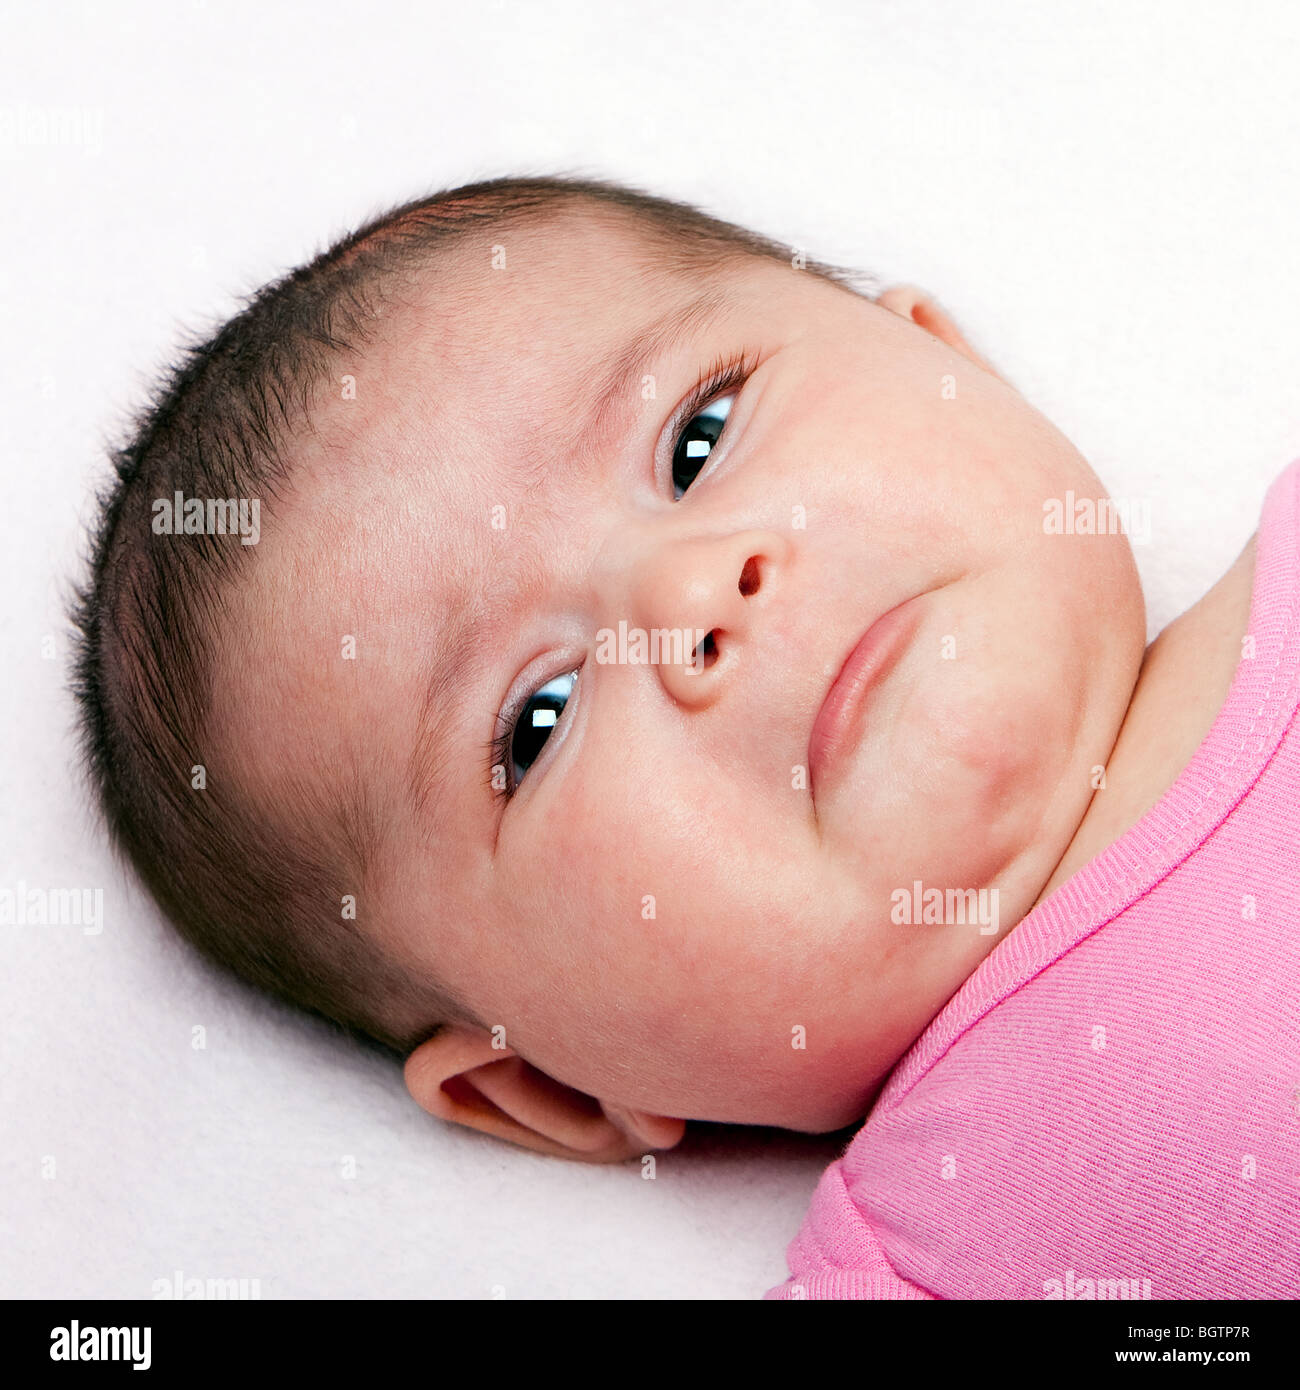 Cute baby with sad expression. Infant with curled lip making faces Stock  Photo - Alamy